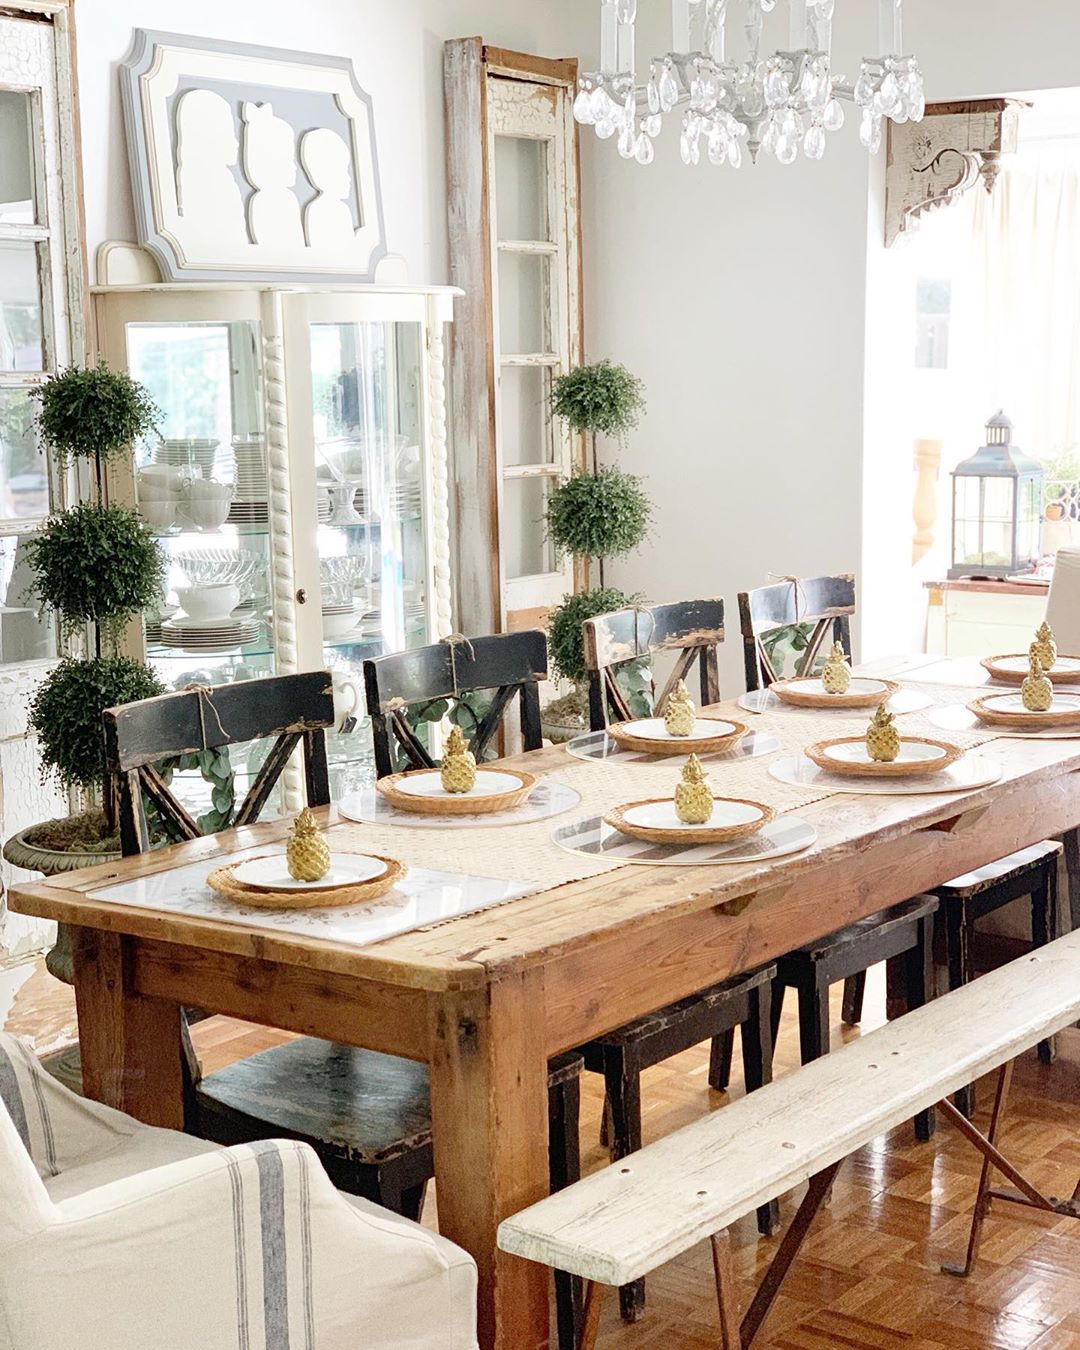 Long wood dining table with plates and gold pineapple statues on them. Photo by Instagram user @robyns_frenchnest